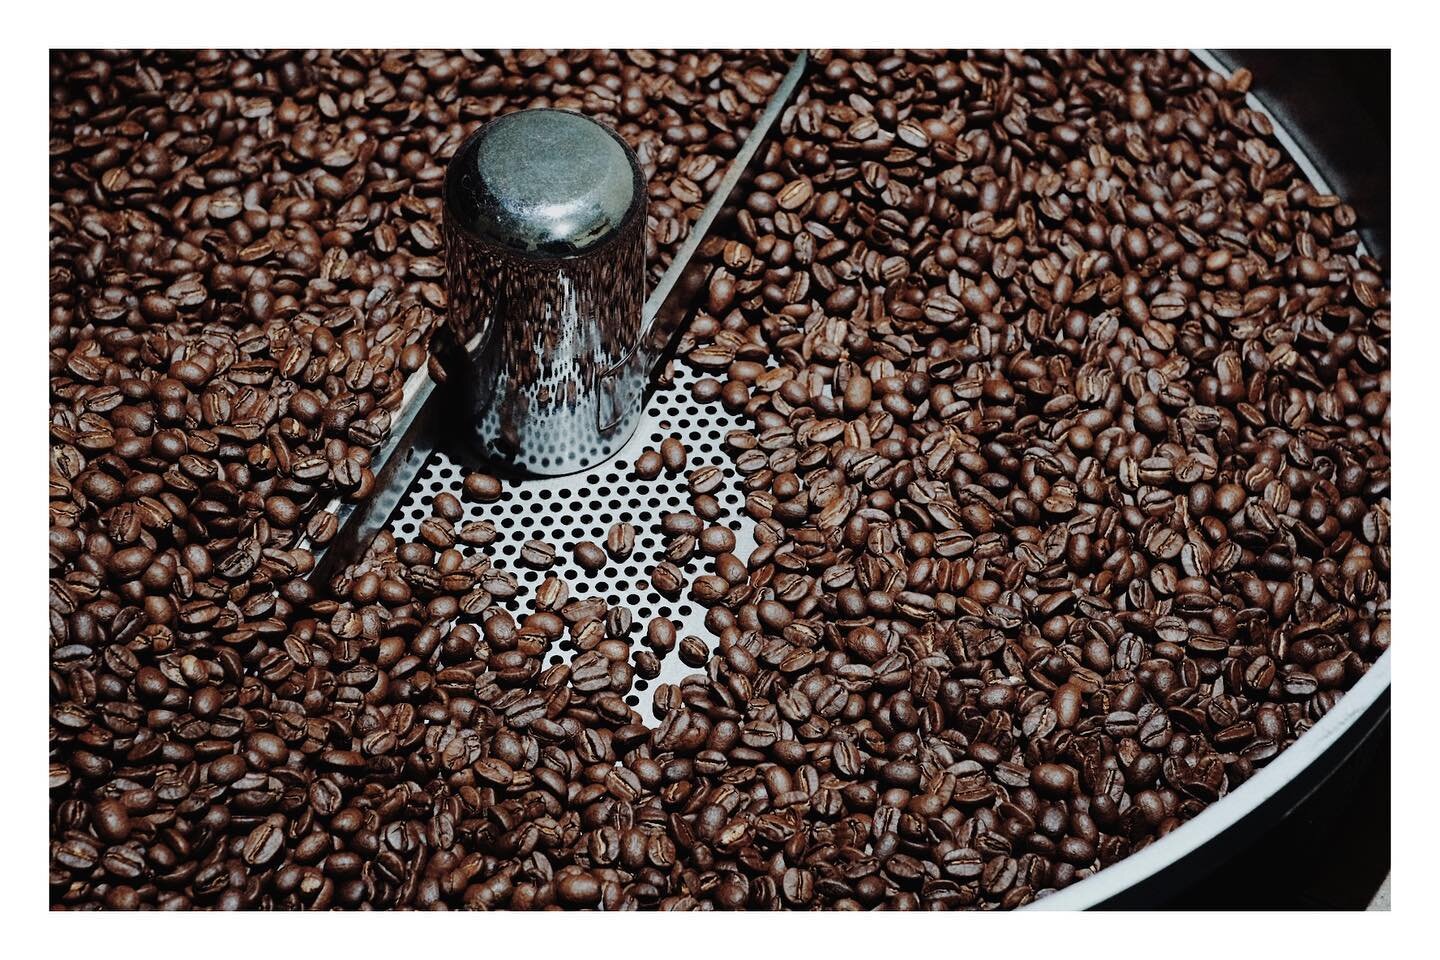 With the harvest completed we now focus on roasting for our local market. We will soon have a surprise for you all! 
.
.
.

#coffeeharvest #coffeecherry #coffeegrowers #coffeefarmers #coffeefarming #coffeelovers #coffeeart #coffeedaily #coffeeholic #